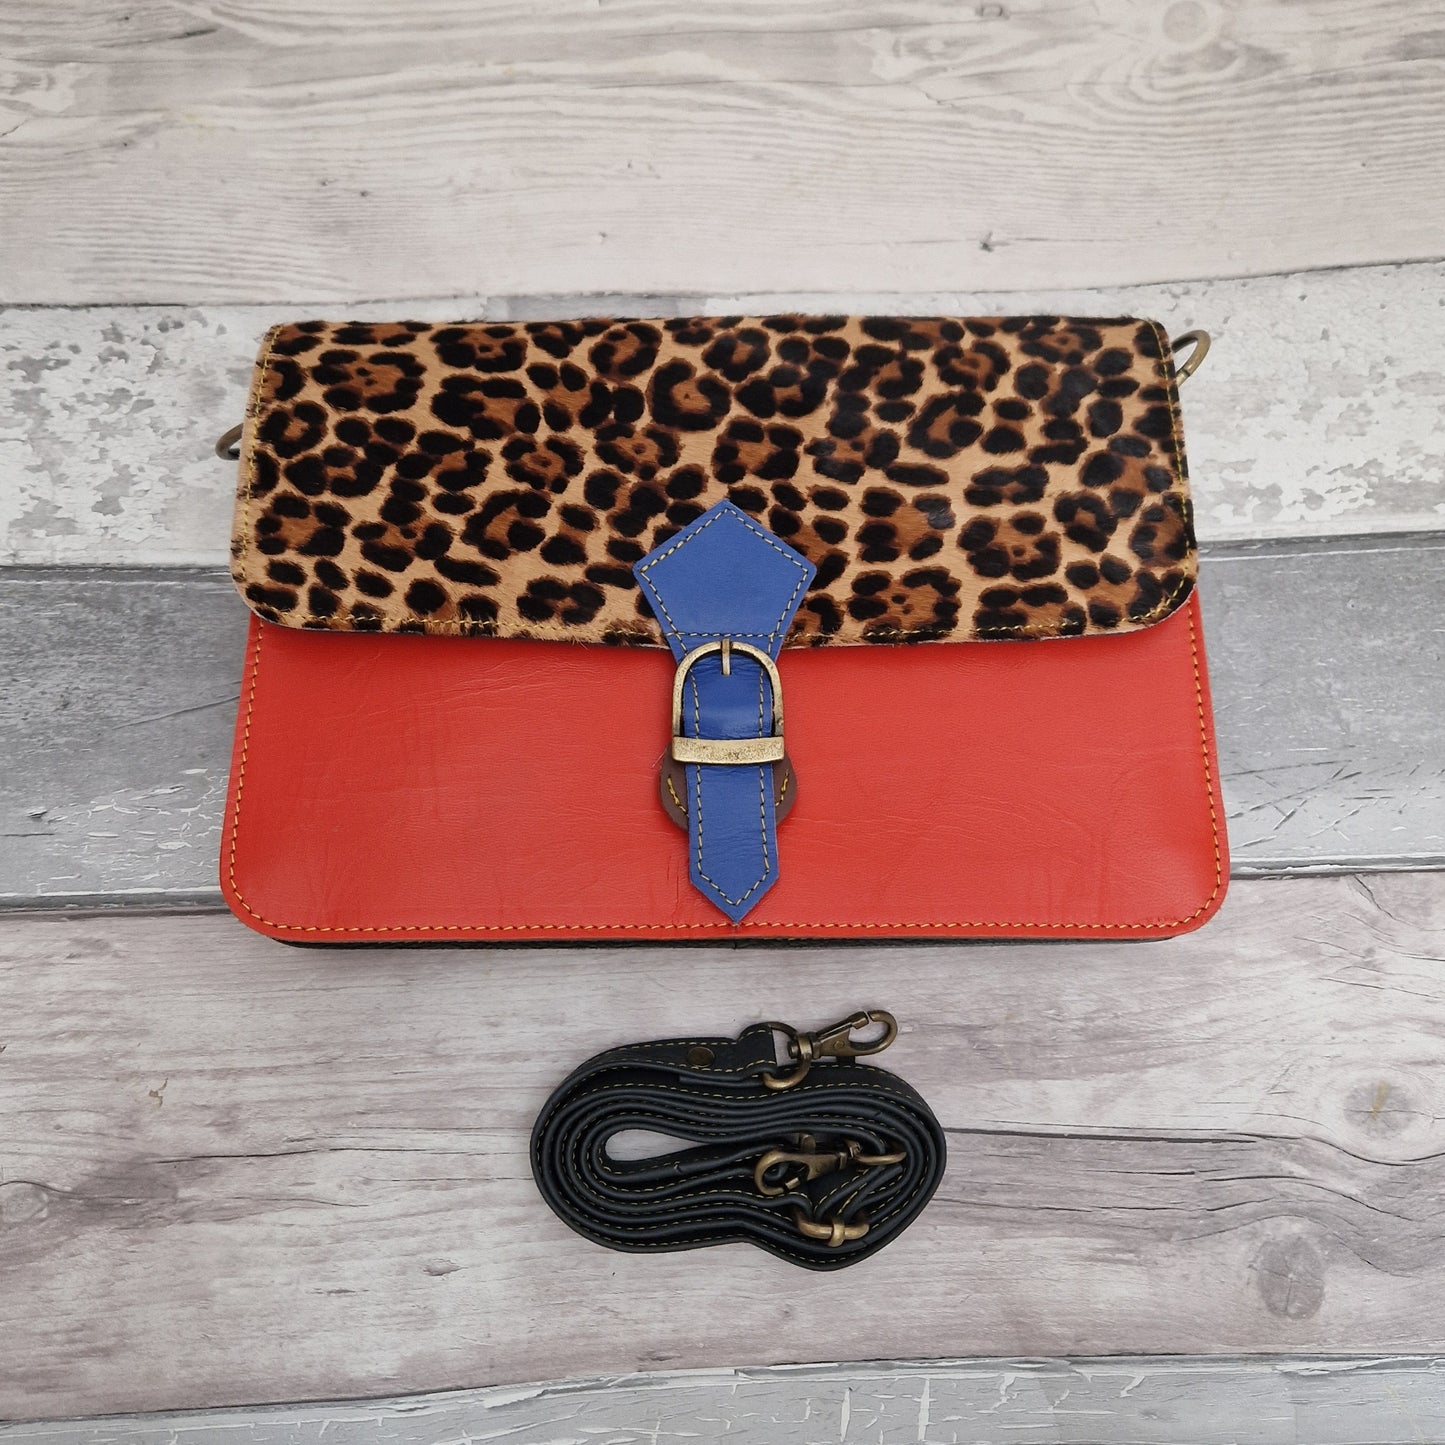 Vivid Orange Leather Bag with a textured leopard print front panel.